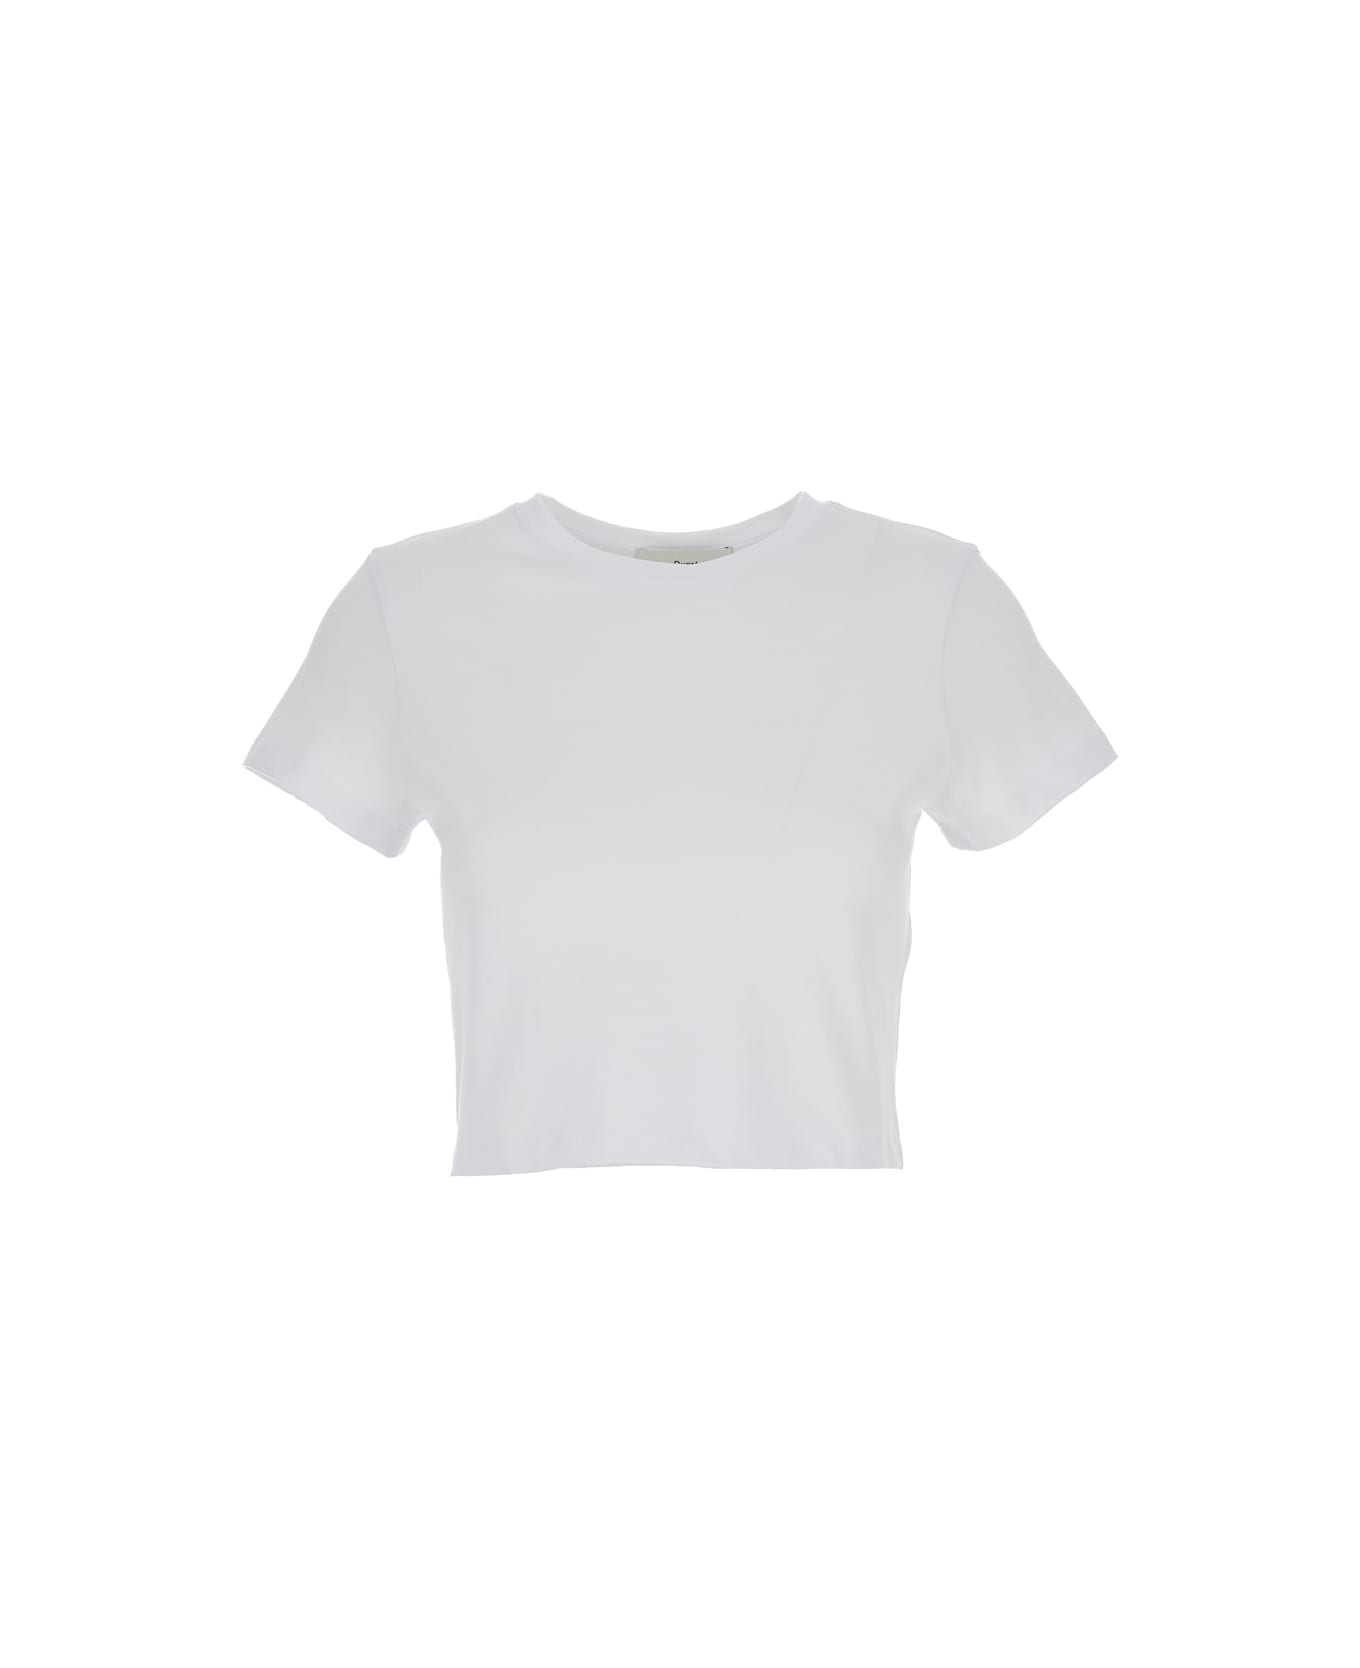 Dunst White Cropped Tee In White Cotton Woman - White Tシャツ